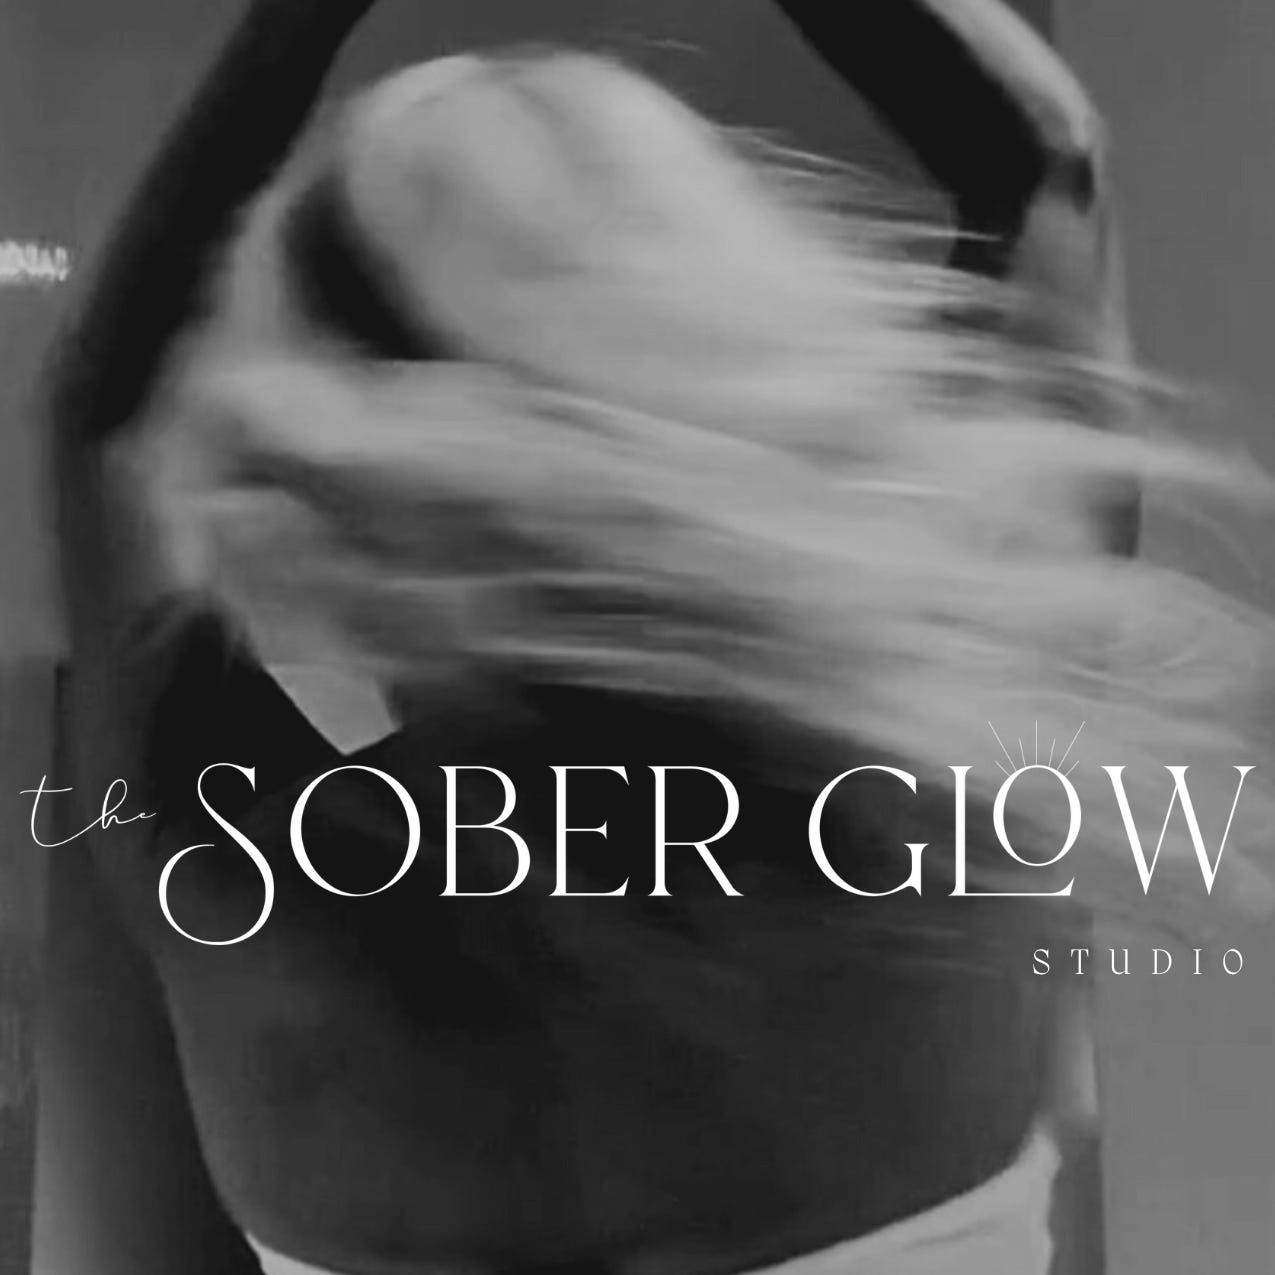 Artwork for the Sober Glow